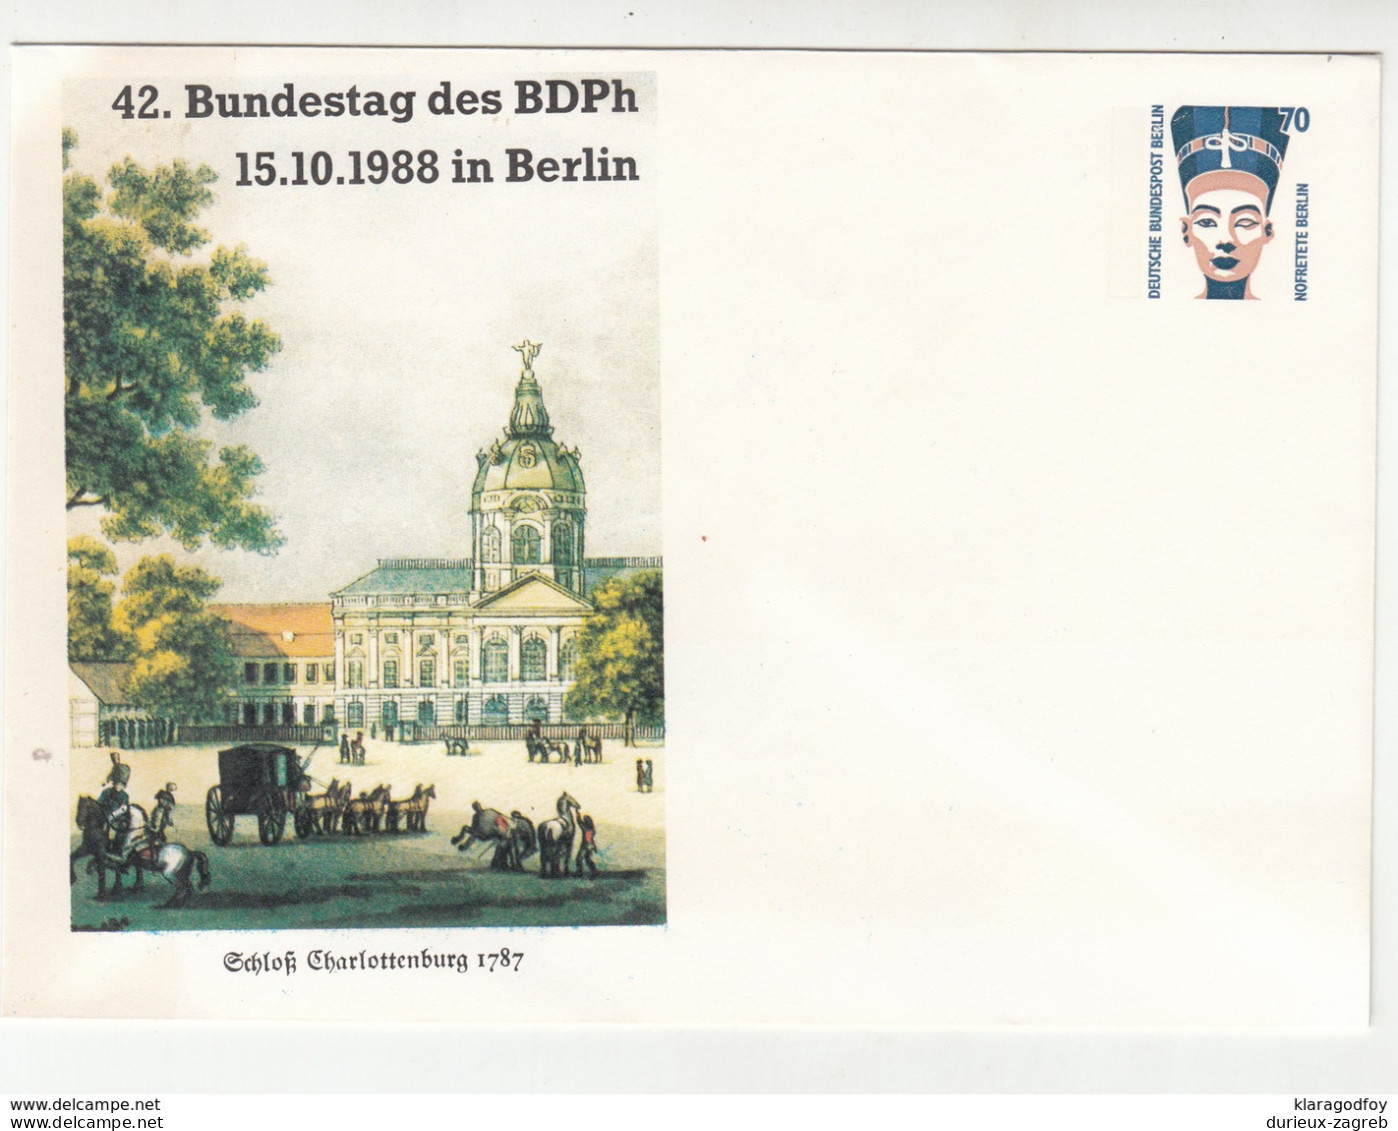 Germany 42. Bundestag Des BDPh Berlin 1988 Illustrated Postal Stationery Letter Cover Unused B200510 - Private Covers - Mint